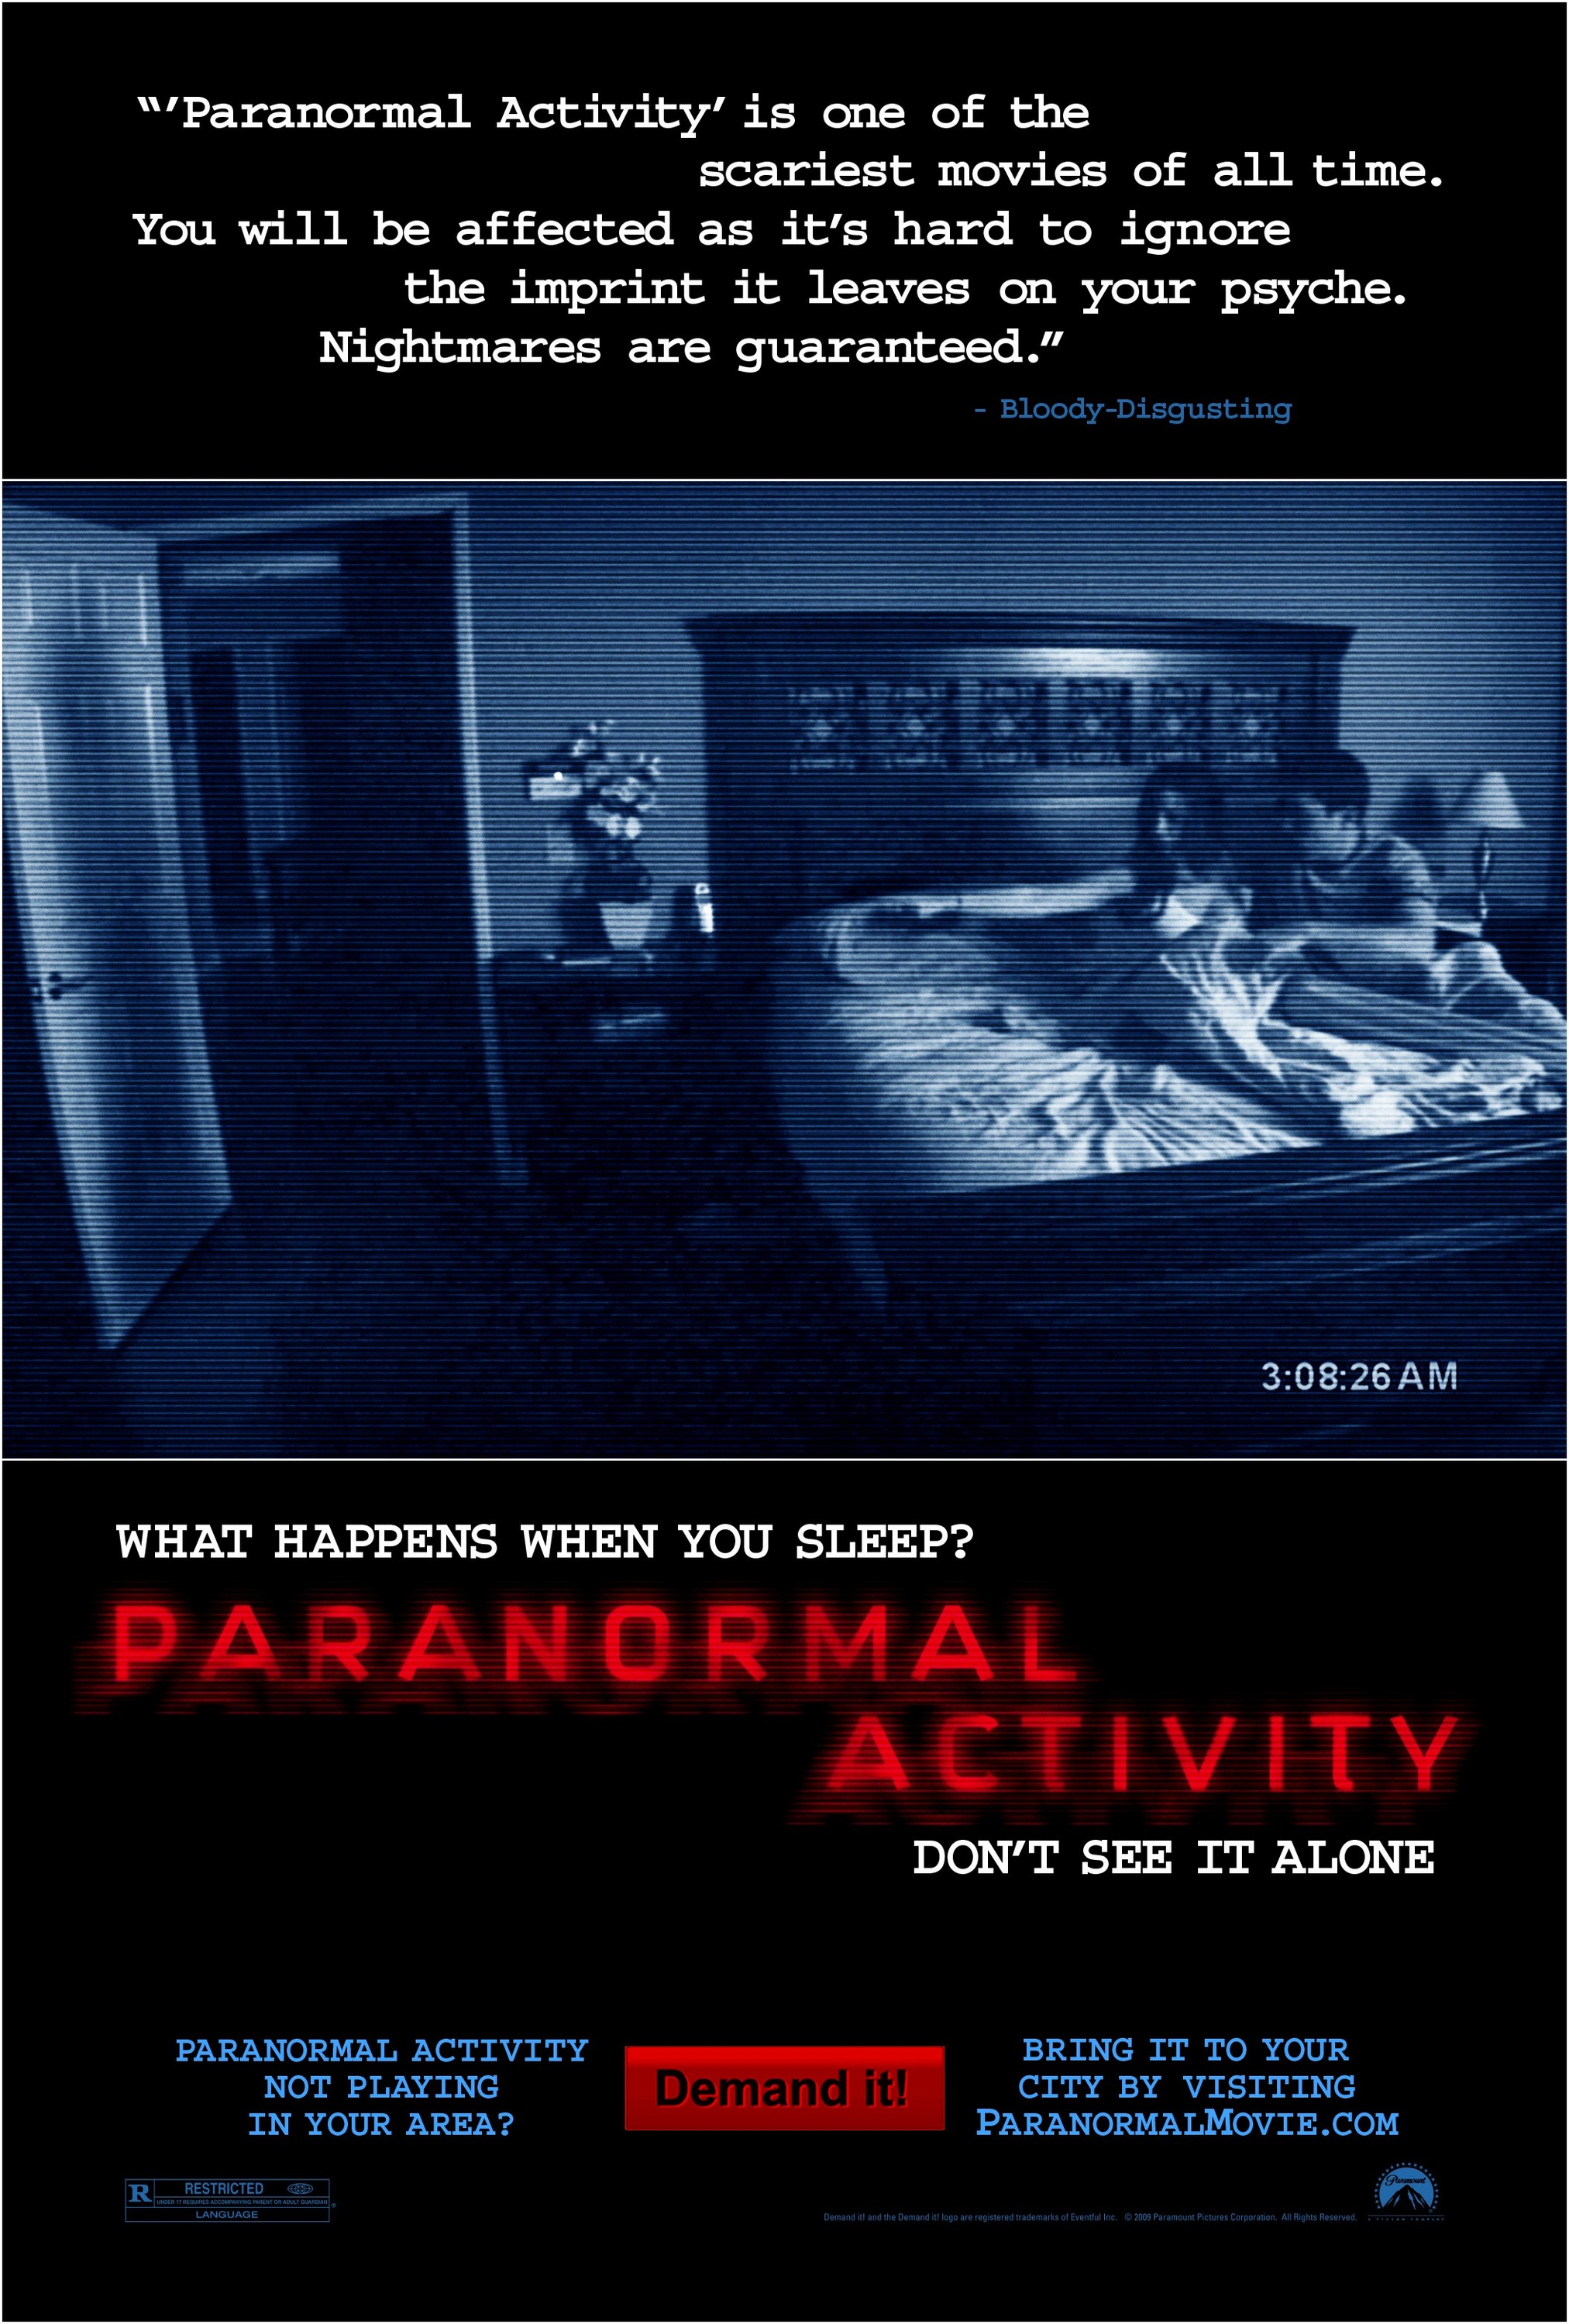 Mega Sized Movie Poster Image for Paranormal Activity 